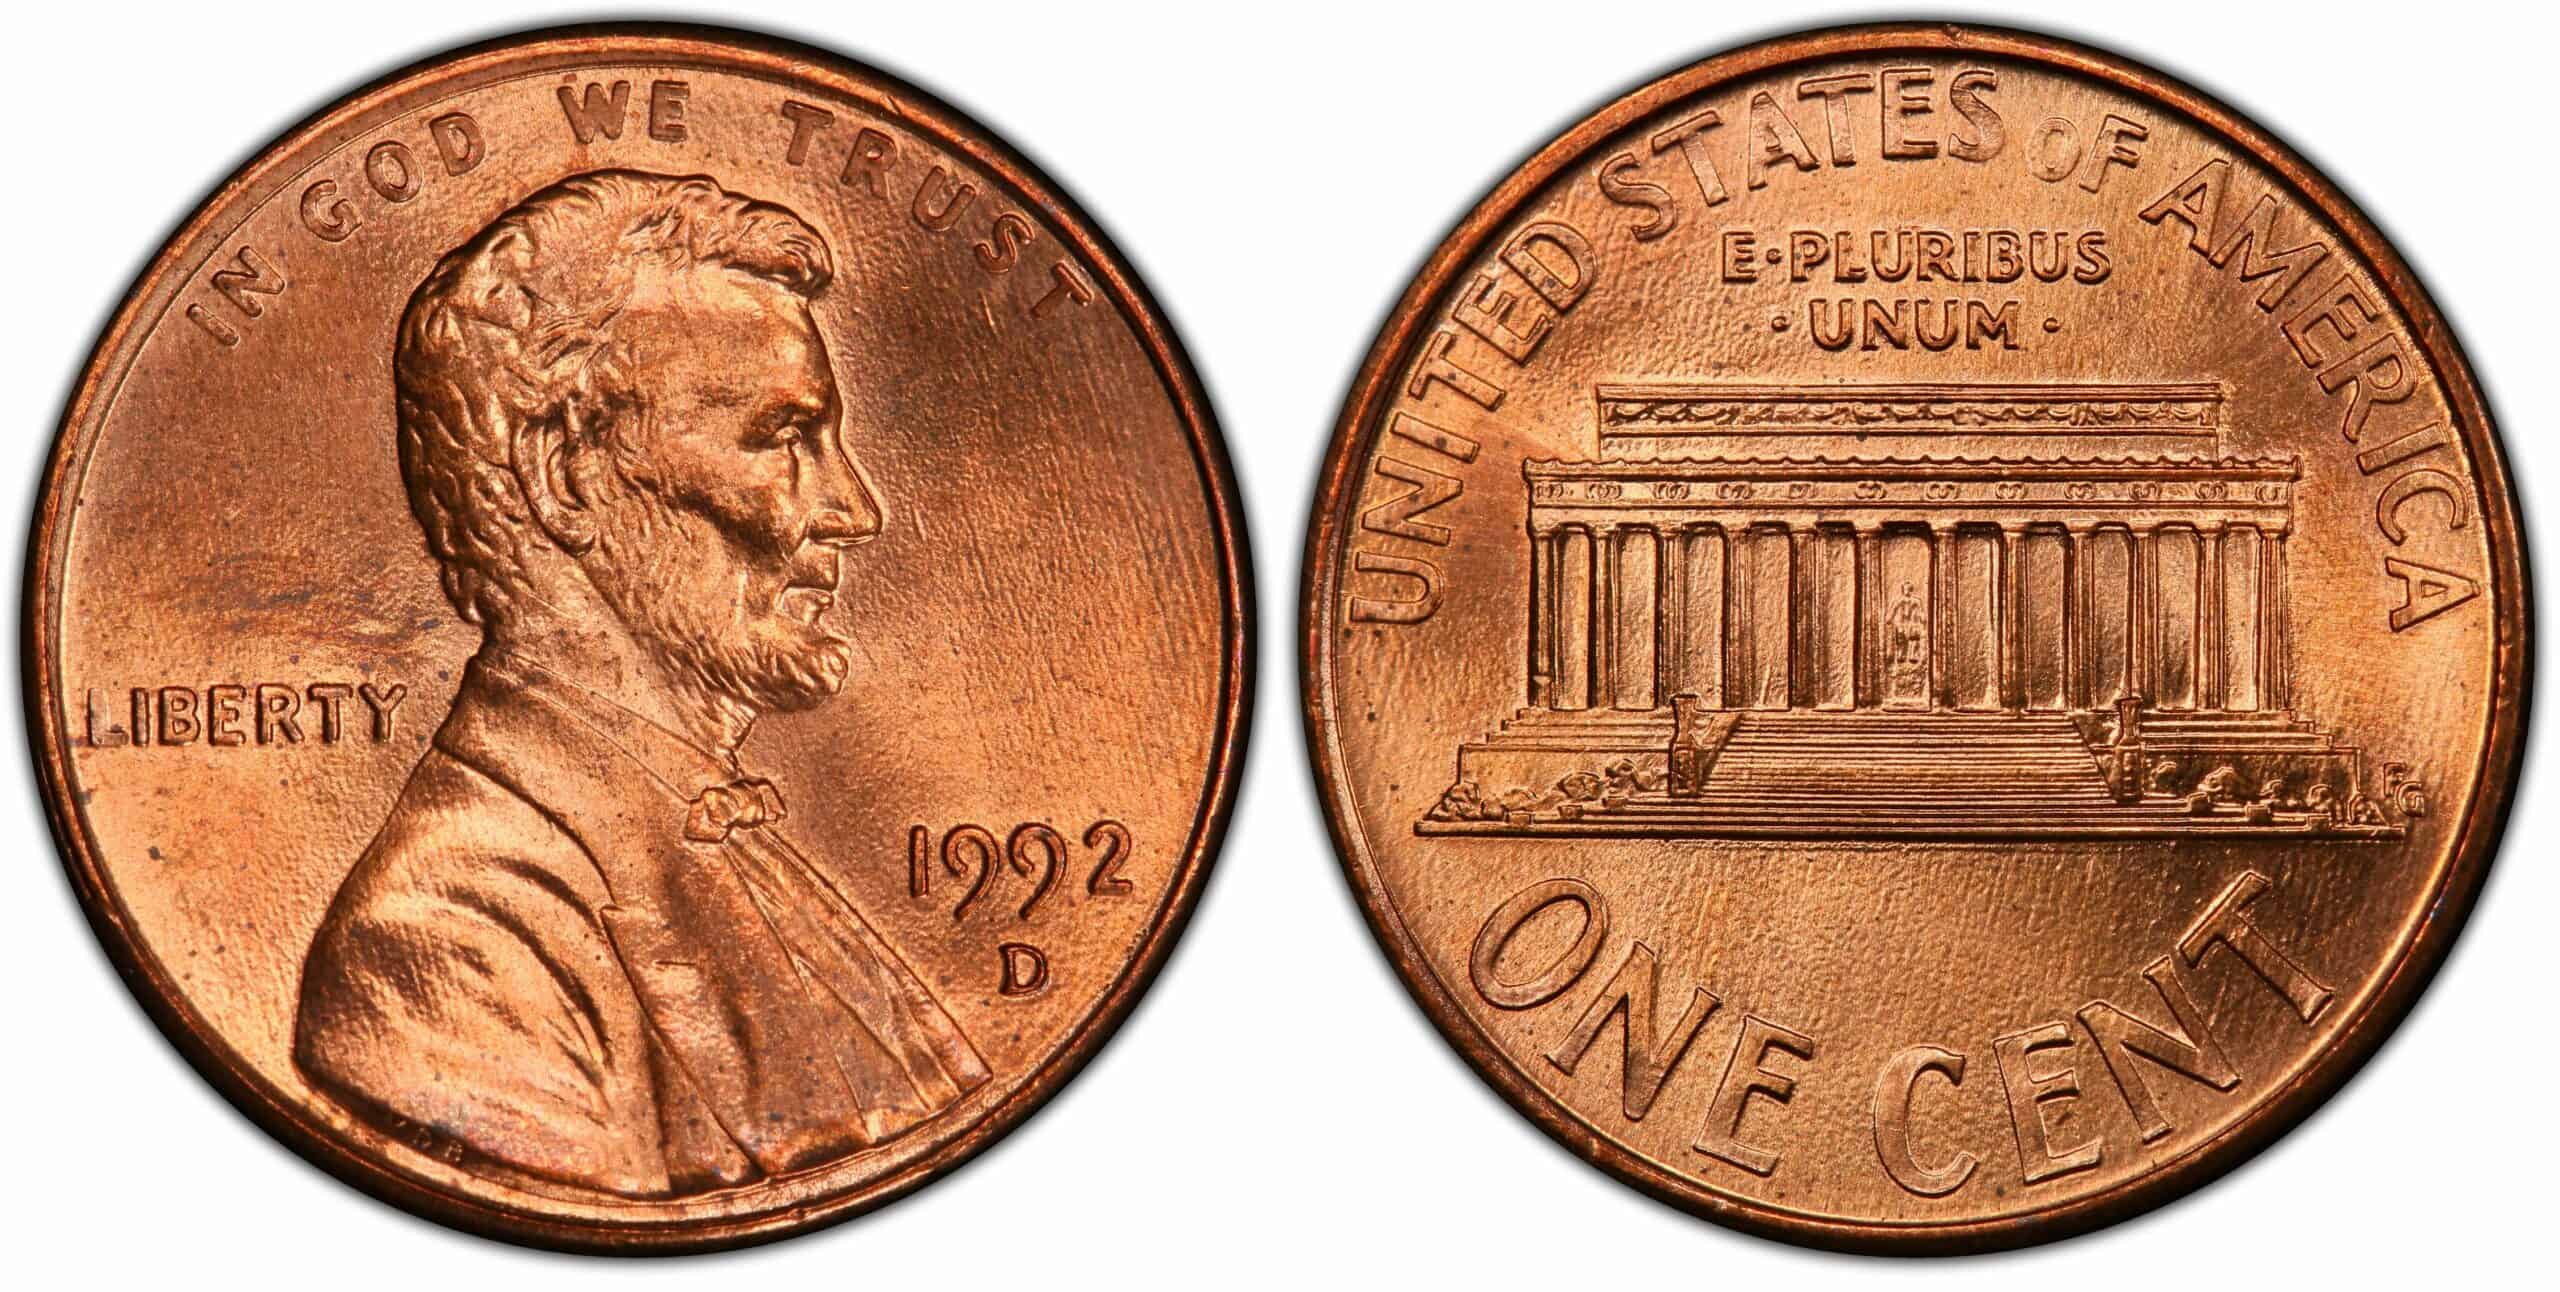 1992 – D Lincoln Penny Value